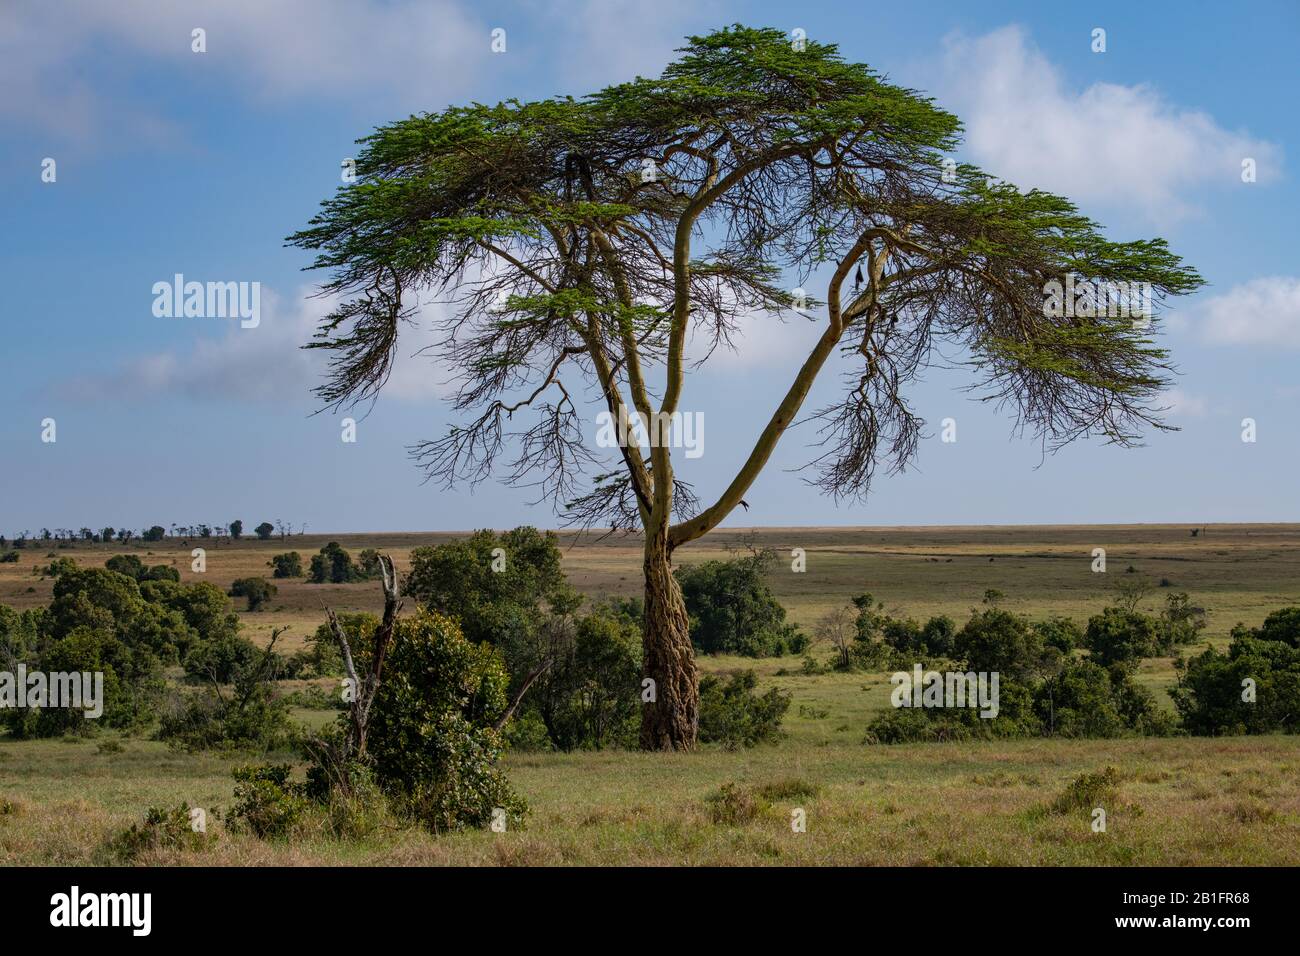 single yellow fever tree set against a grassland background and blue skies in the Masai Mara, Kenya Stock Photo